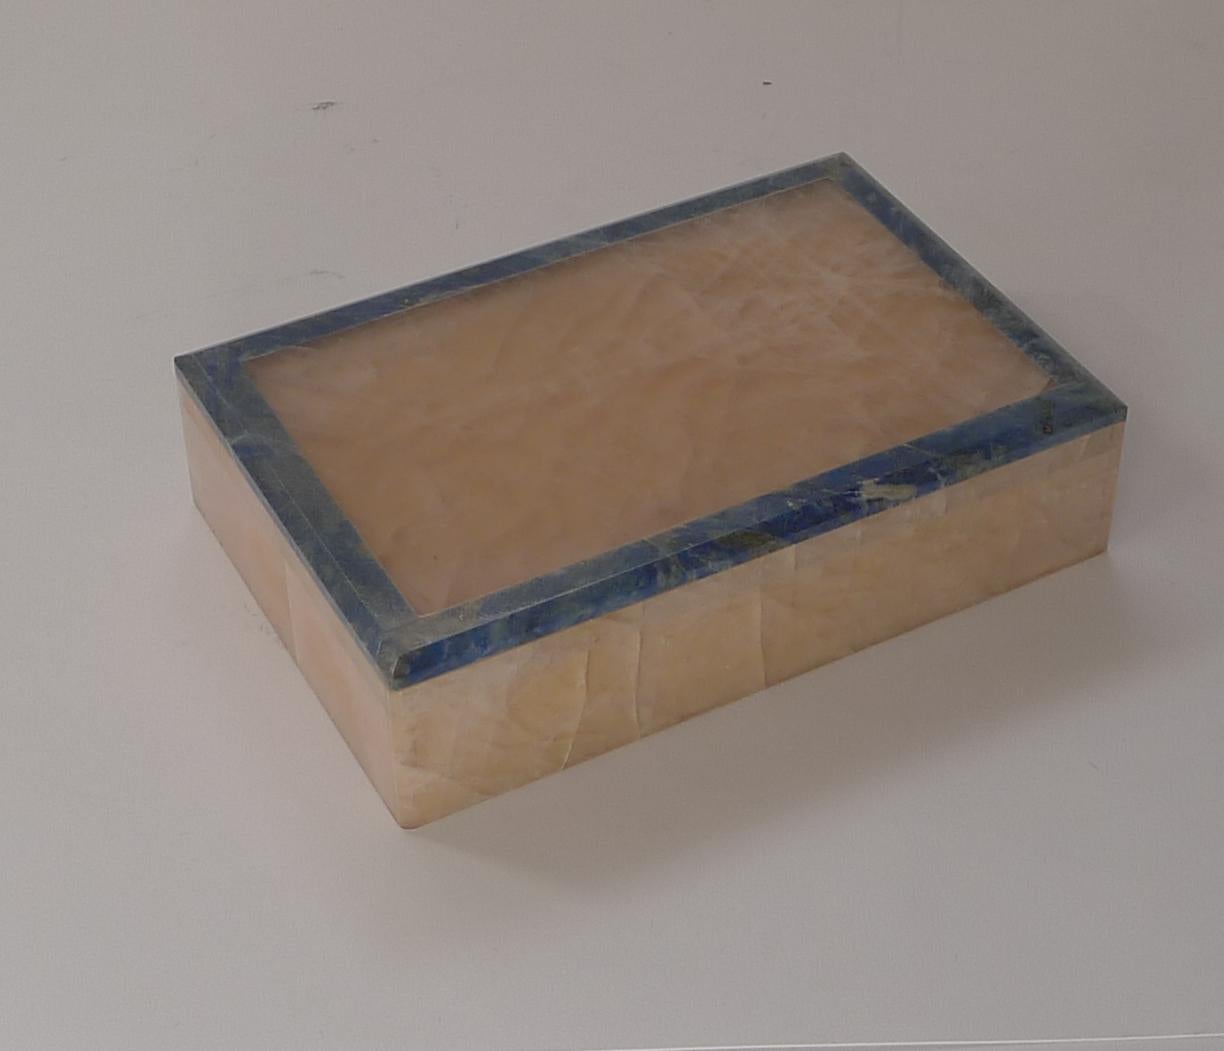 A wonderful early Art Deco box made from highly prized Rose Quartz framed by exotic blue Lapis Lazuli, a winning combination.

Excellent condition dating to c.1920. Measures: 6 1/8